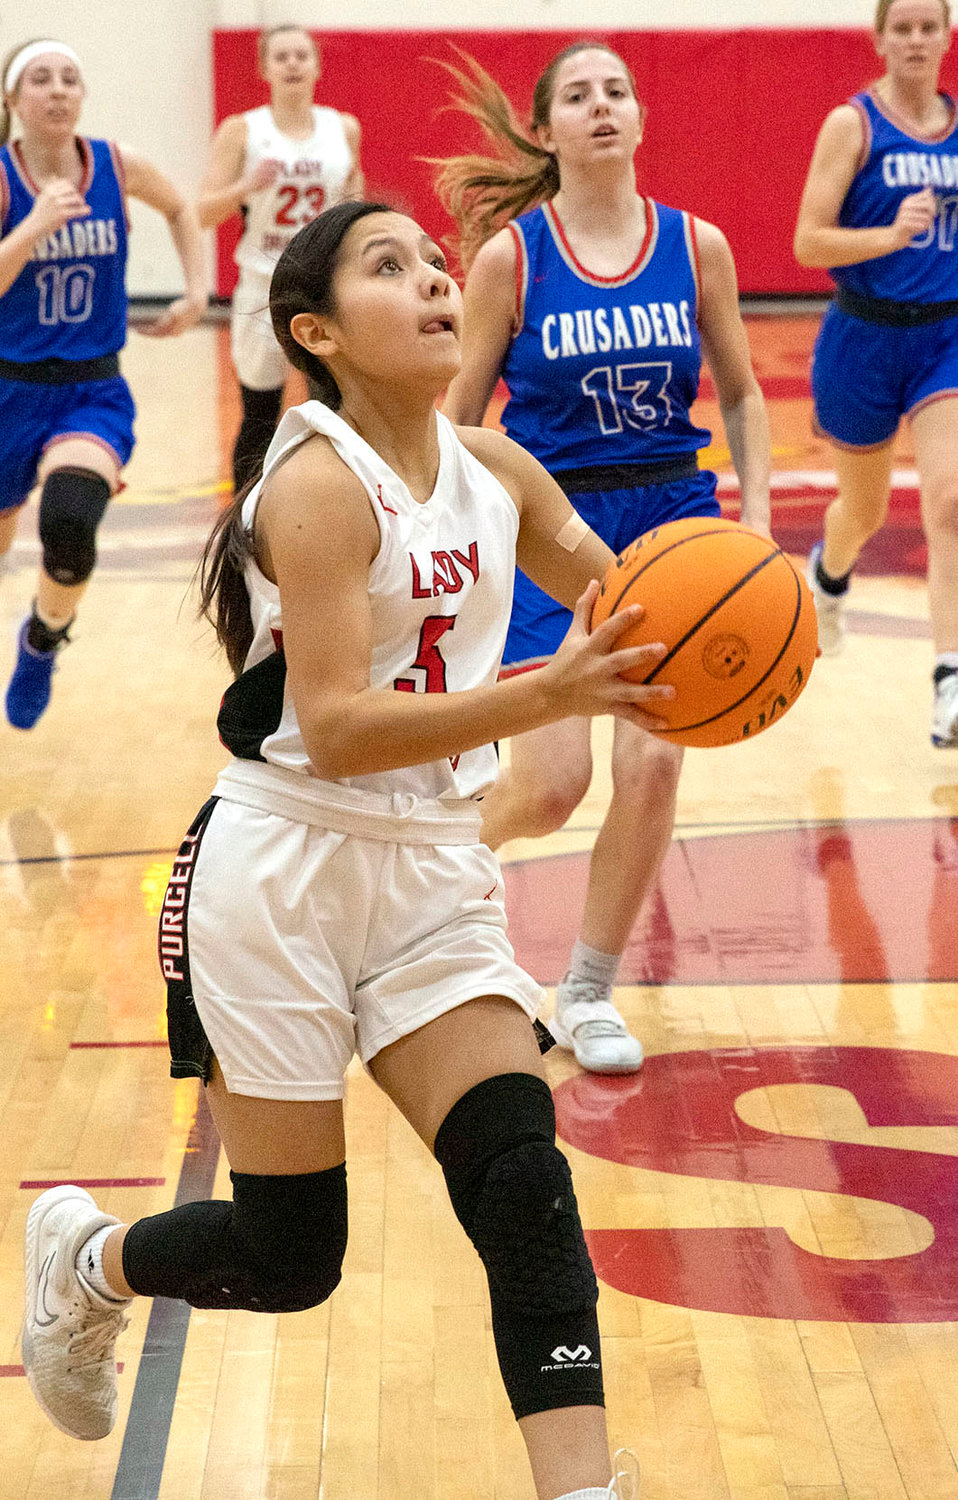 Purcell freshman Kenna Esparza moves in for a layup during the Dragons’ 57-40 win over Christian Heritage Academy in the Distict tournament. Esparza scored 10 points.